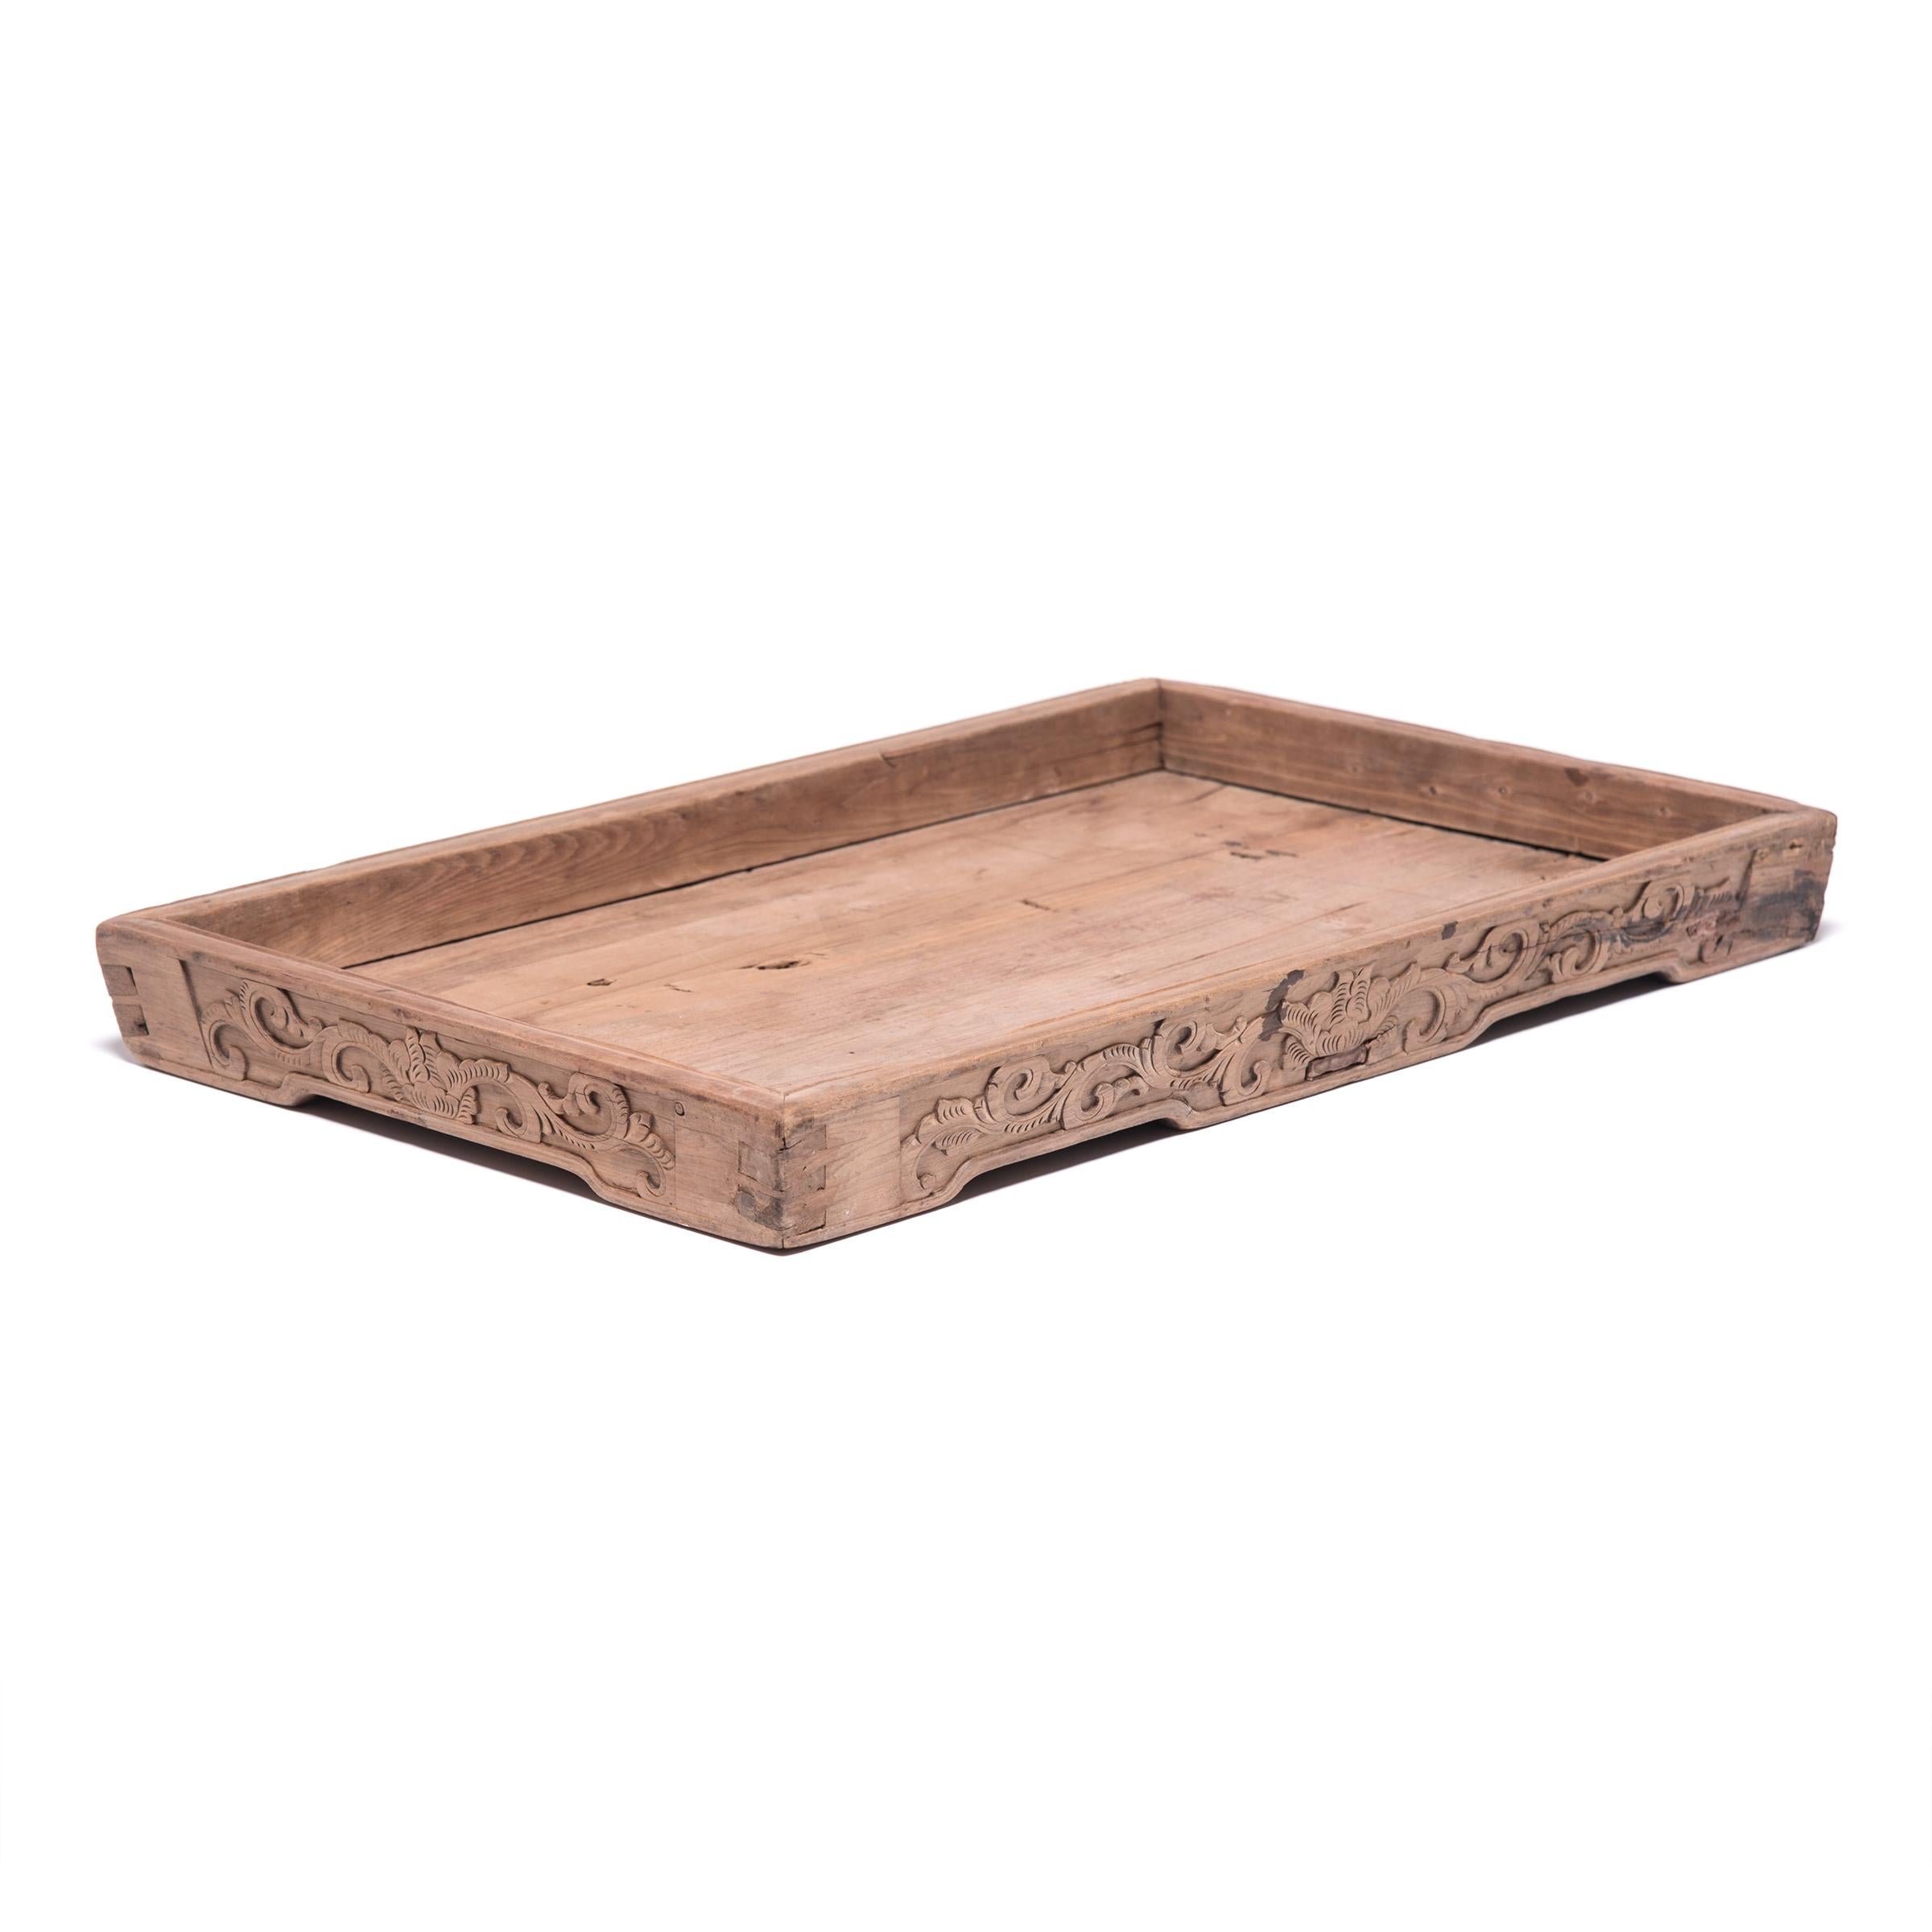 Finely carved floral and geometric motifs and a subtly recessed base give the simple lines of this century-old tray true provincial elegance. It has developed great character from years of serving tea, likely for friends and family gathered on